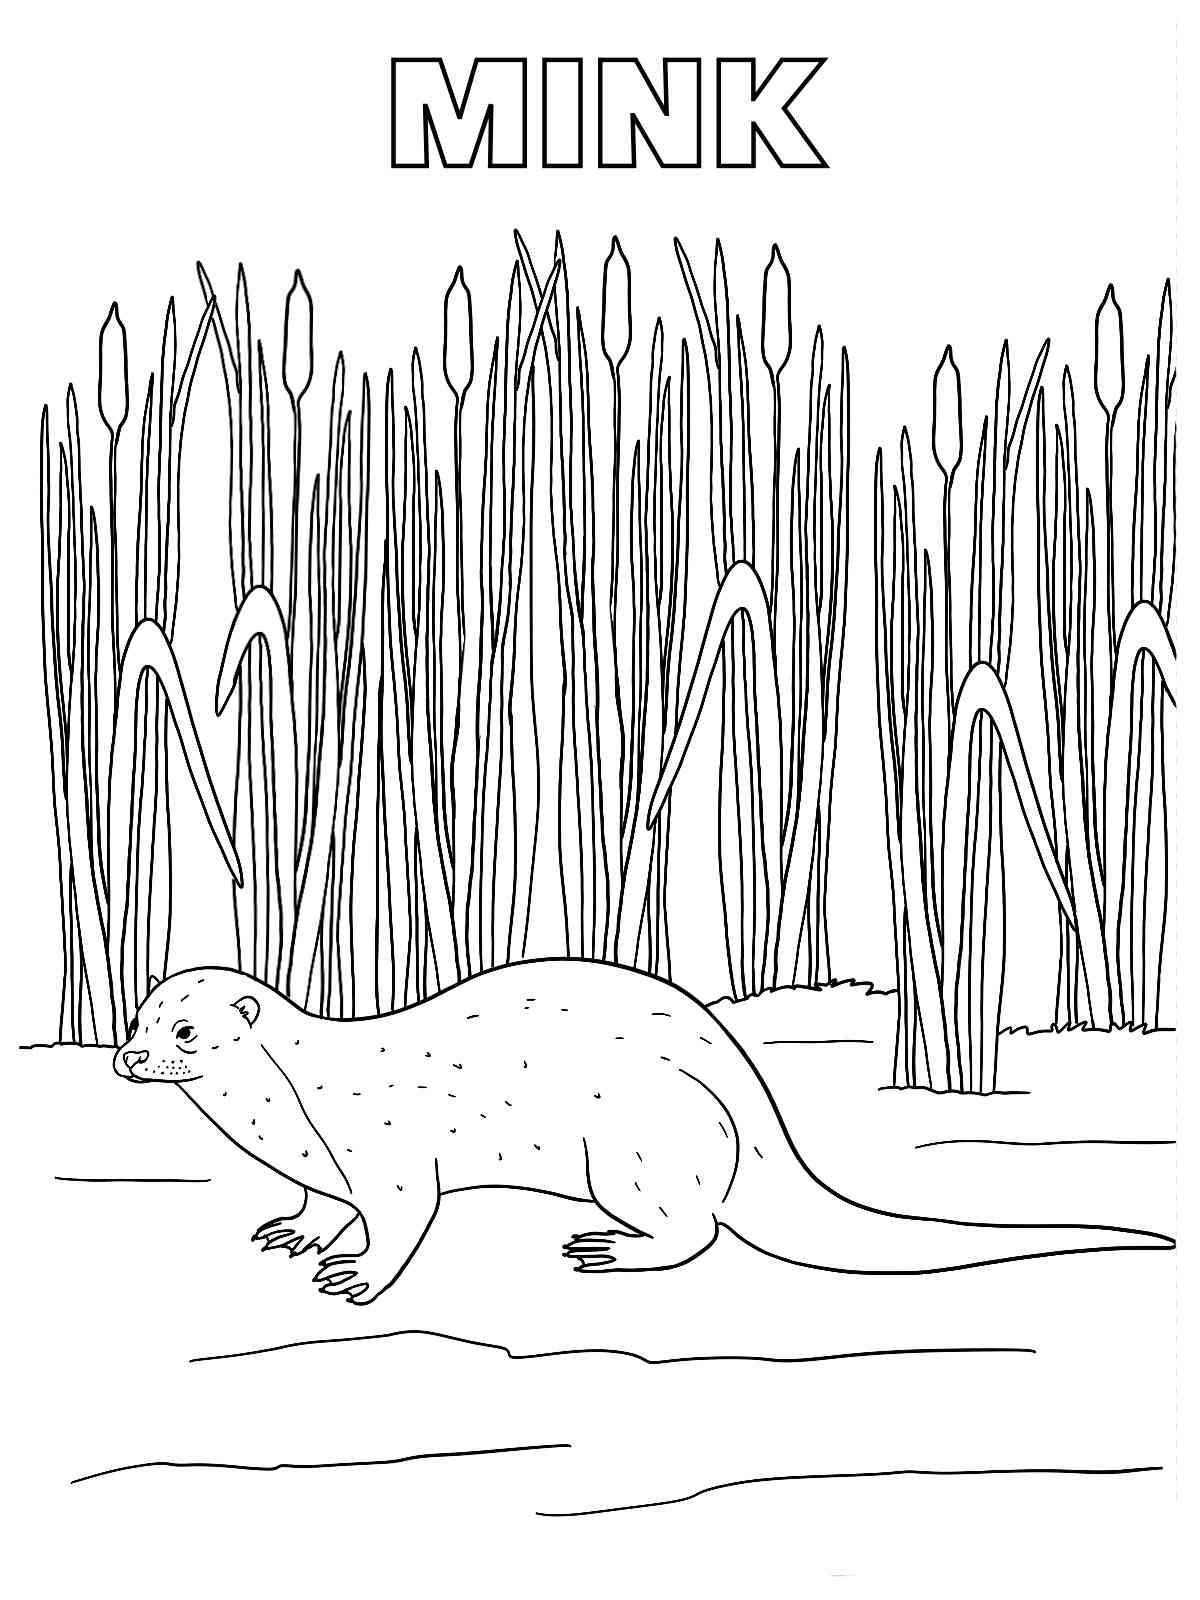 Mink in the grass coloring page